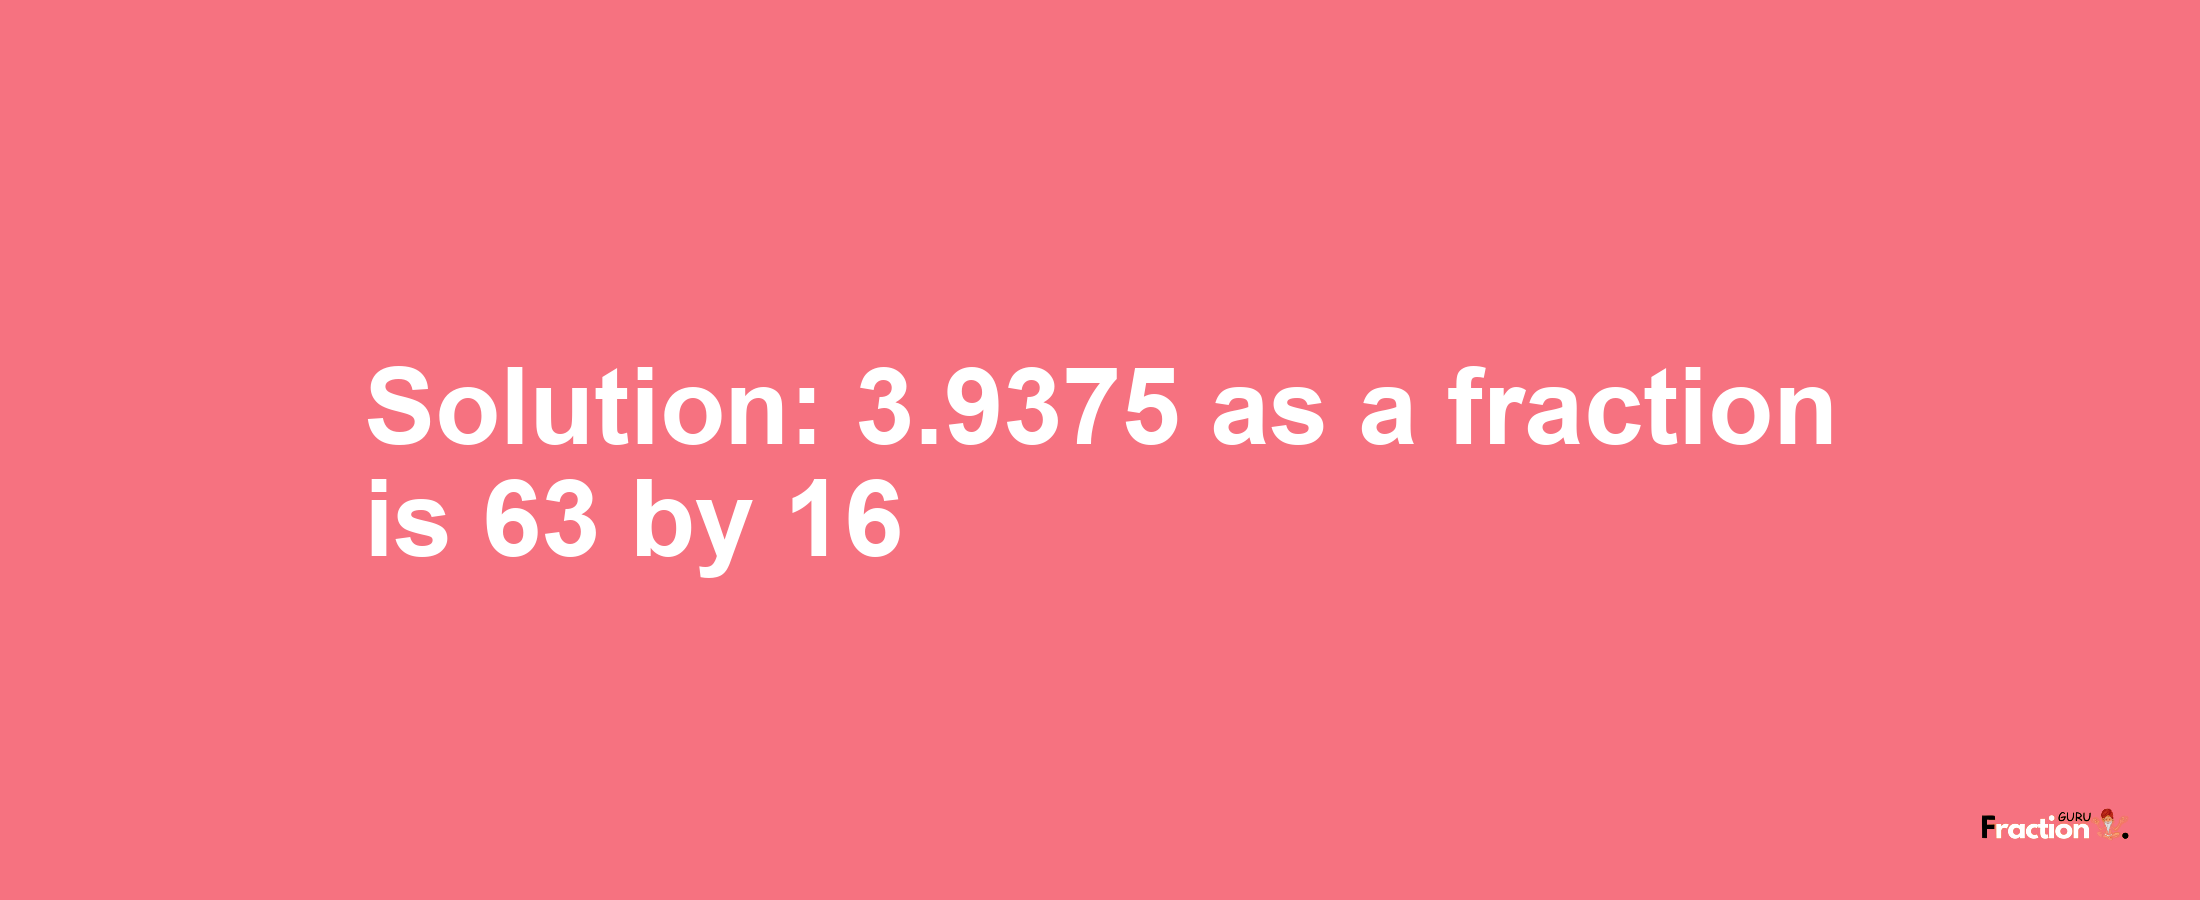 Solution:3.9375 as a fraction is 63/16